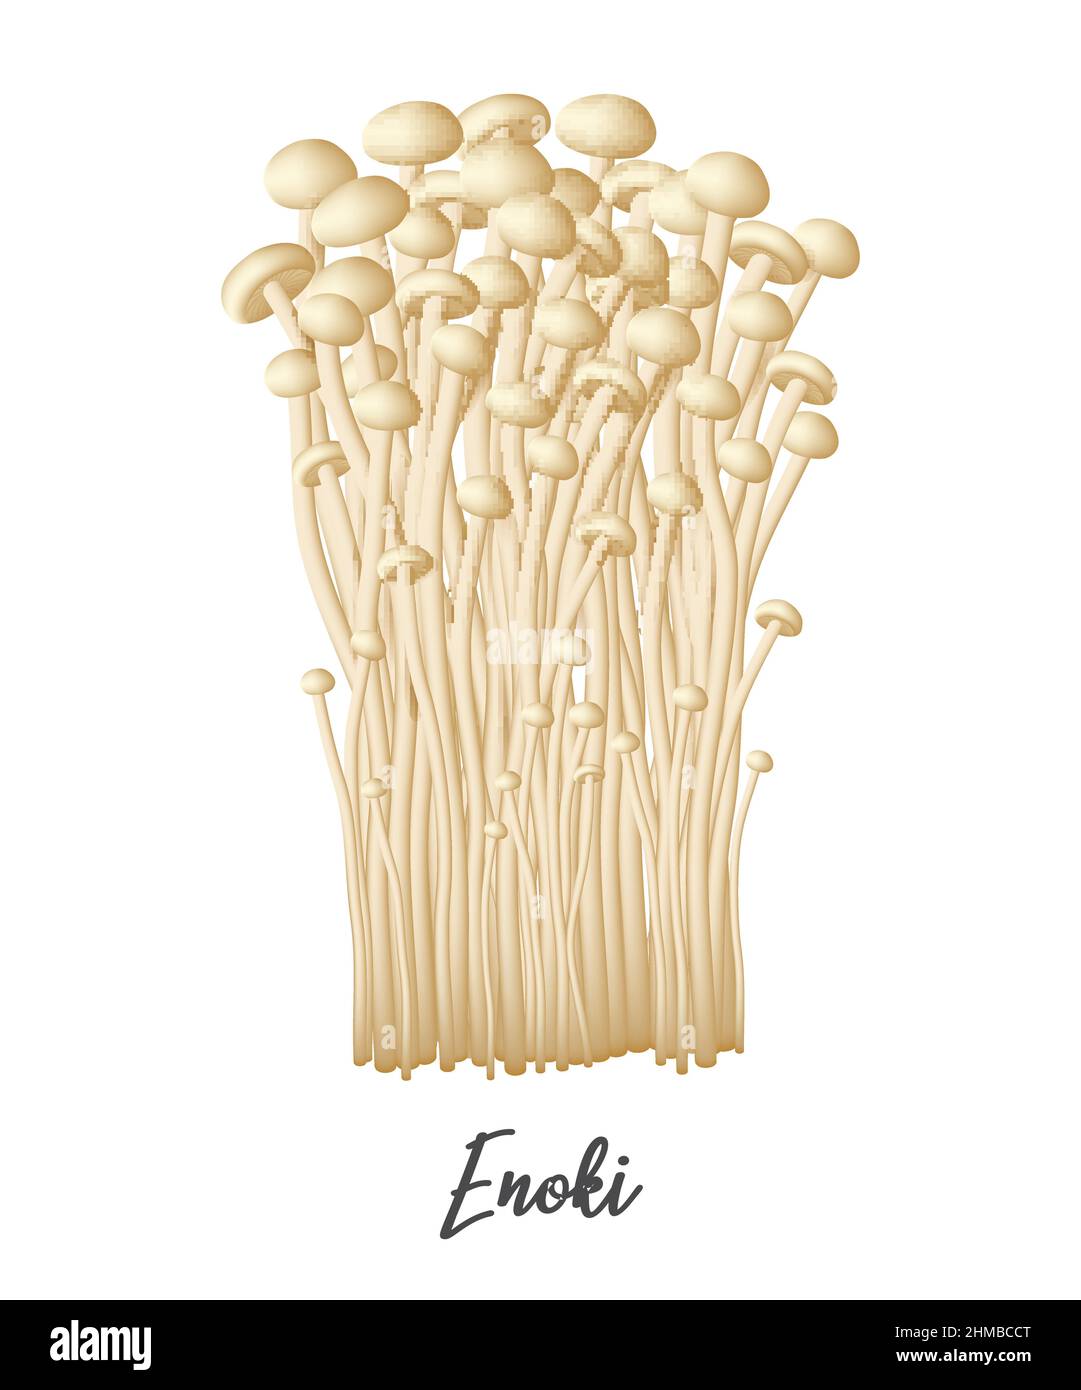 Enoki Mushroom on white background, natural food ingredient, realistic vector illustration close-up Stock Vector